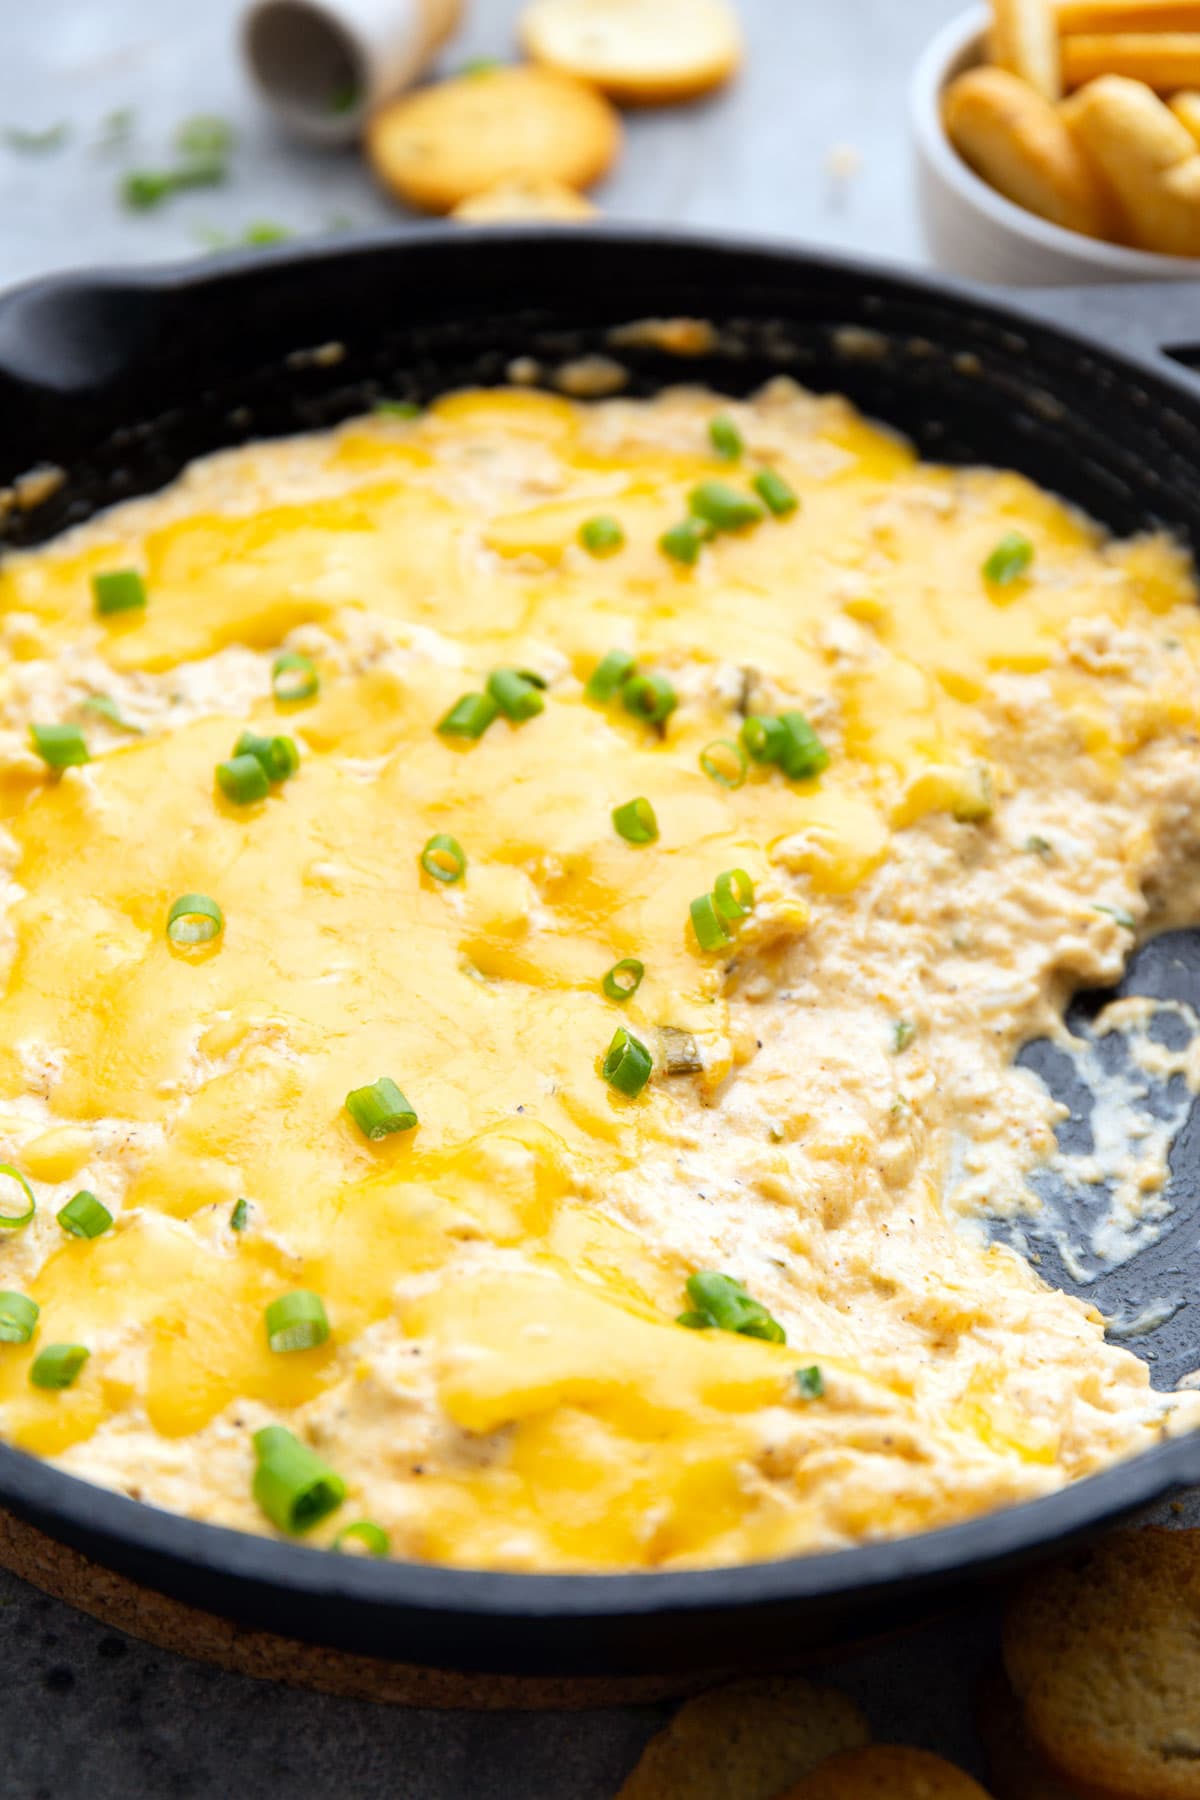 Hot crab dip topped with melted cheddar cheese and green onions in a cast iron pan.